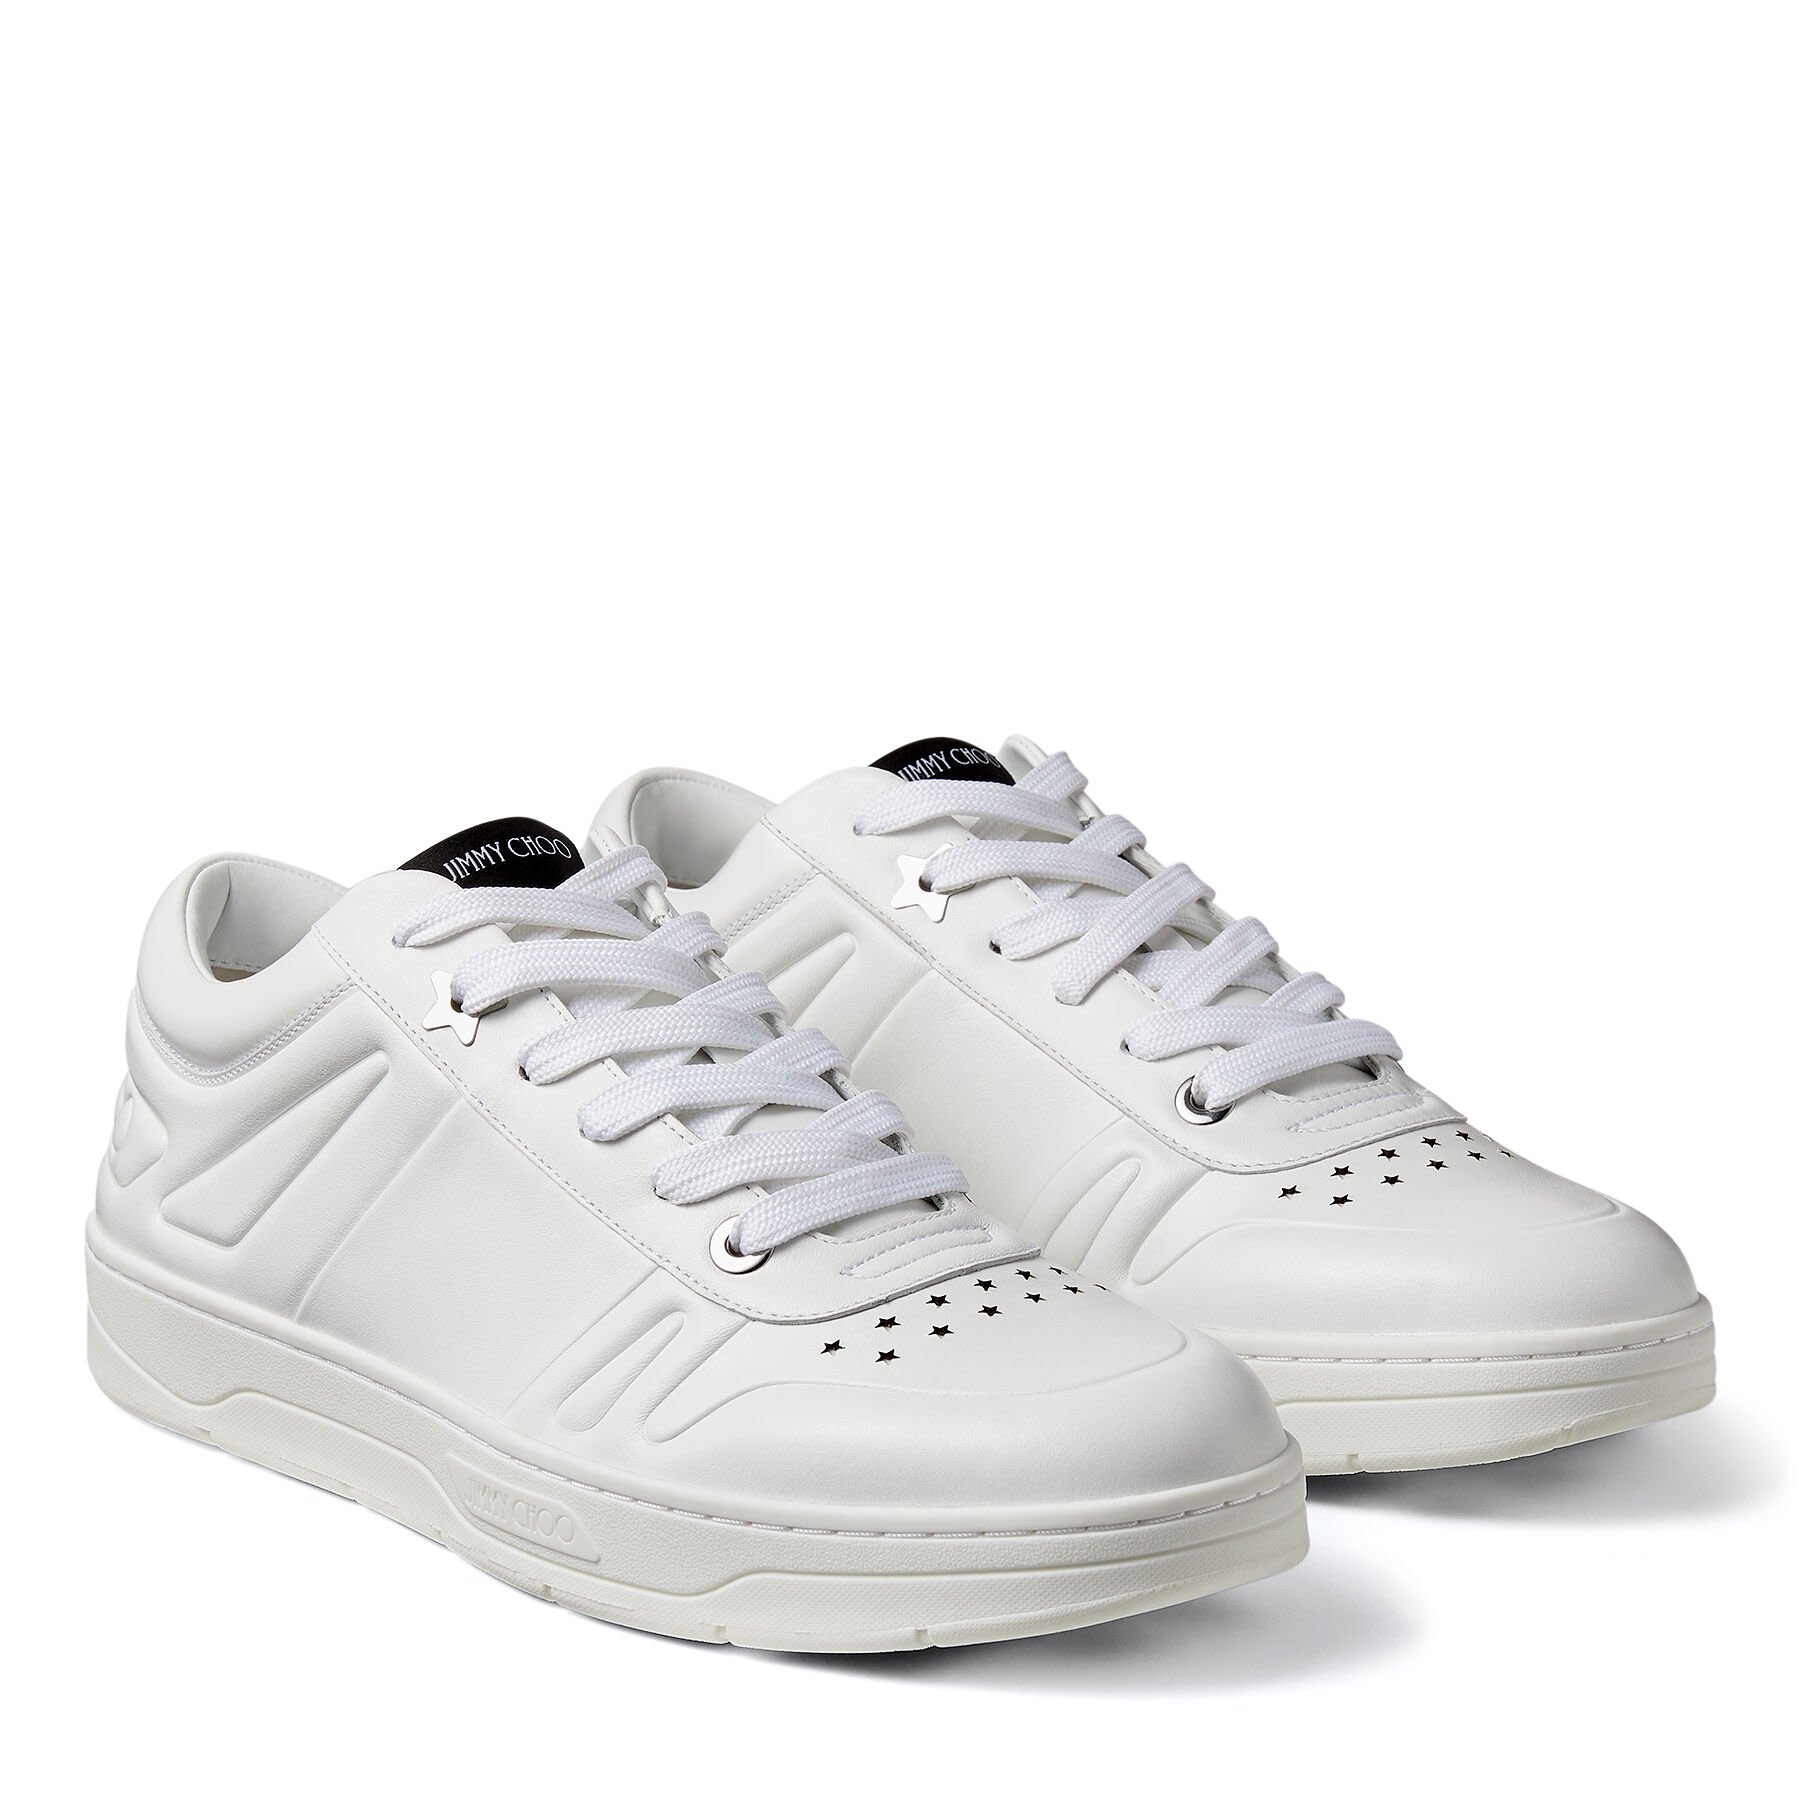 White Calf Leather Lace-Up Trainers|HAWAII M |Cruise '20 |JIMMY CHOO